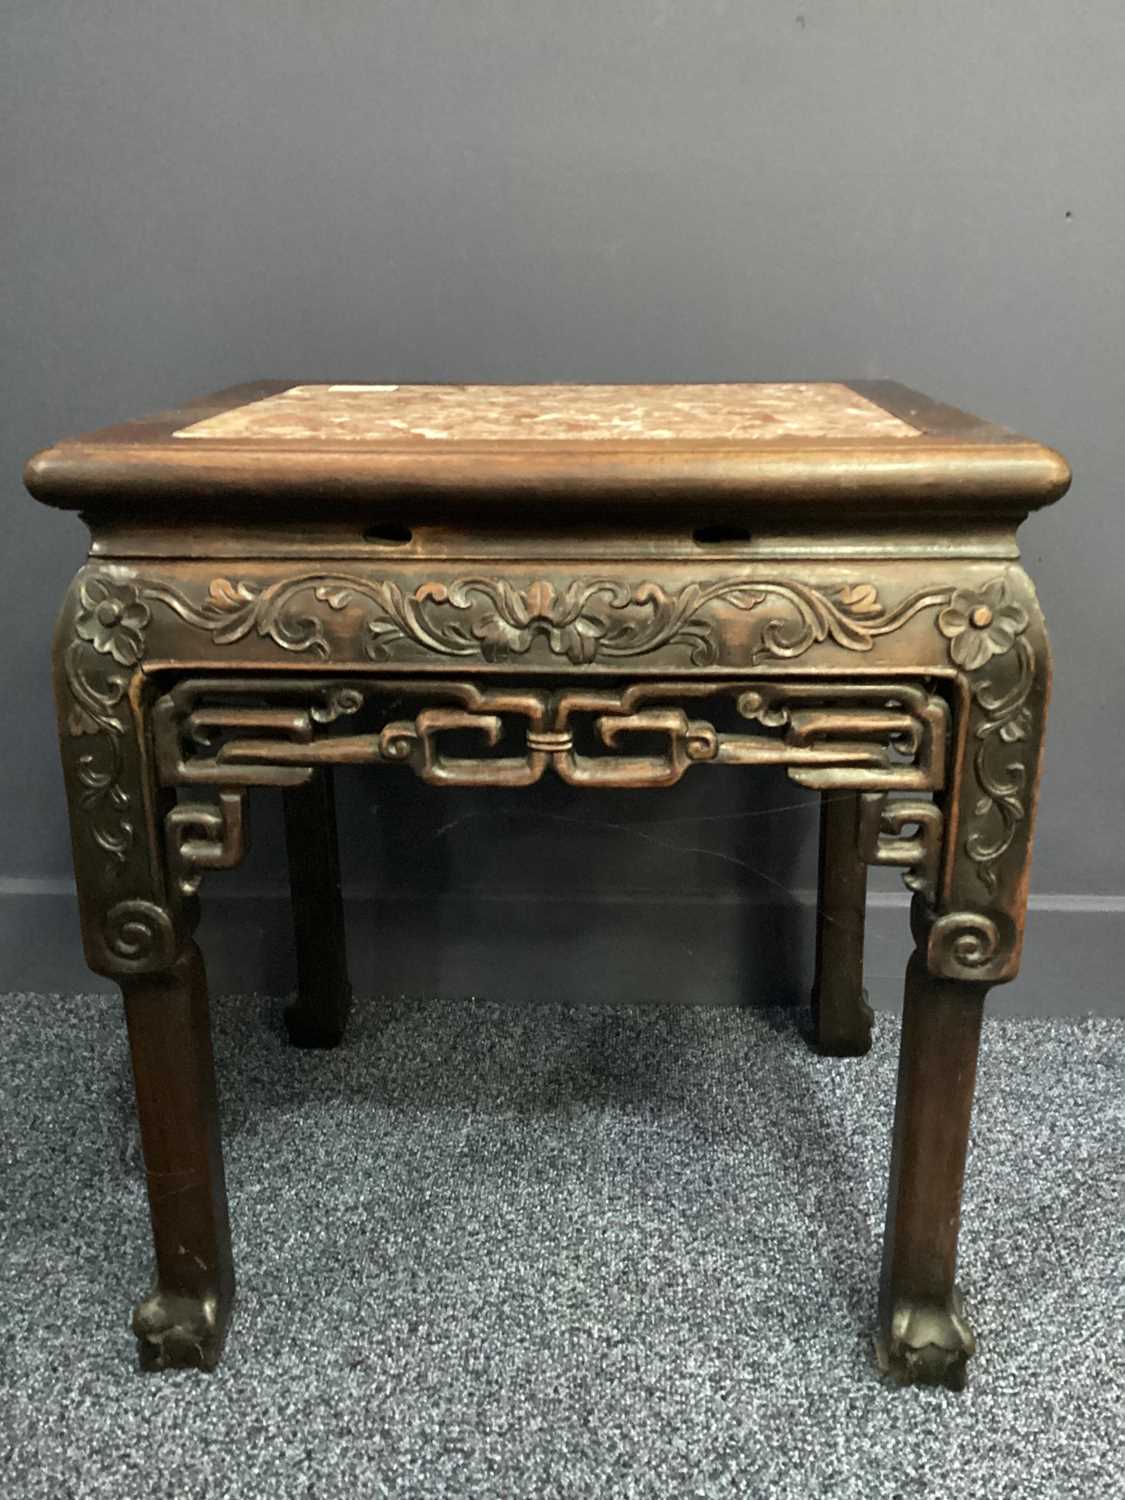 CHINESE HARDWOOD SIDE TABLE, LATE 19TH/EARLY 20TH CENTURY - Image 5 of 7